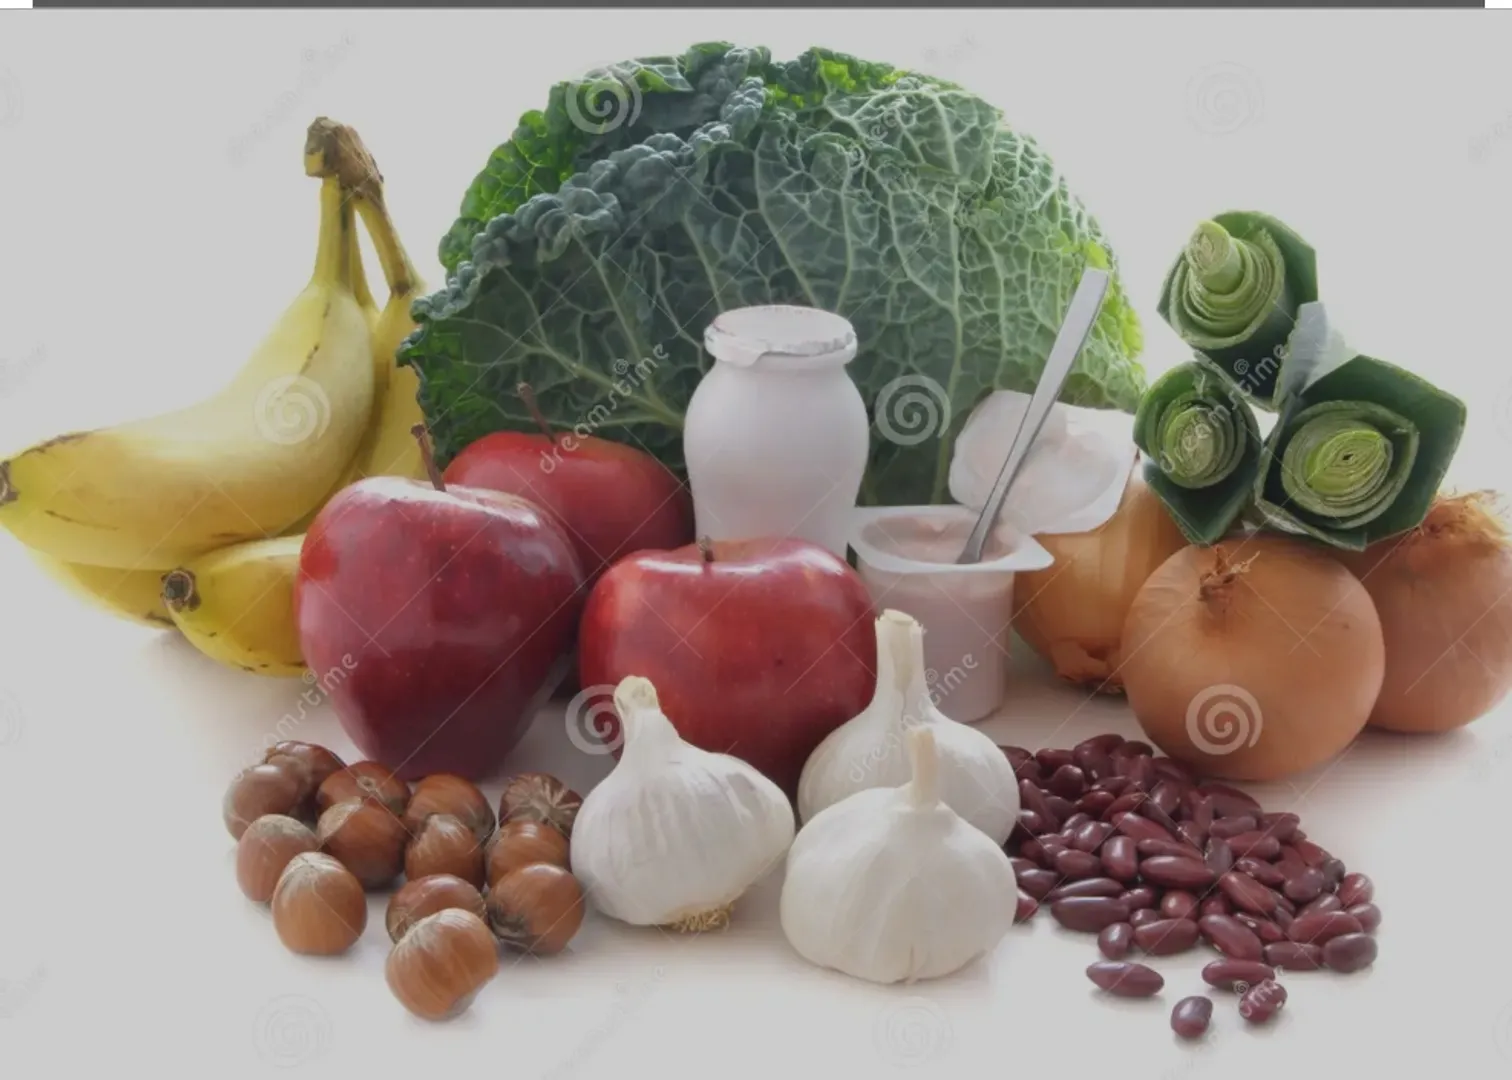 Prebiotic Foods: Feeding Your Microbiome Prebiotics are non-digestible fibers that serve as food for beneficial gut bacteria. Foods such as garlic, onions, asparagus, and bananas are excellent sources of prebiotics. By incorporating these foods into your diet, you're providing the necessary nourishment for your gut microbiome to thrive.